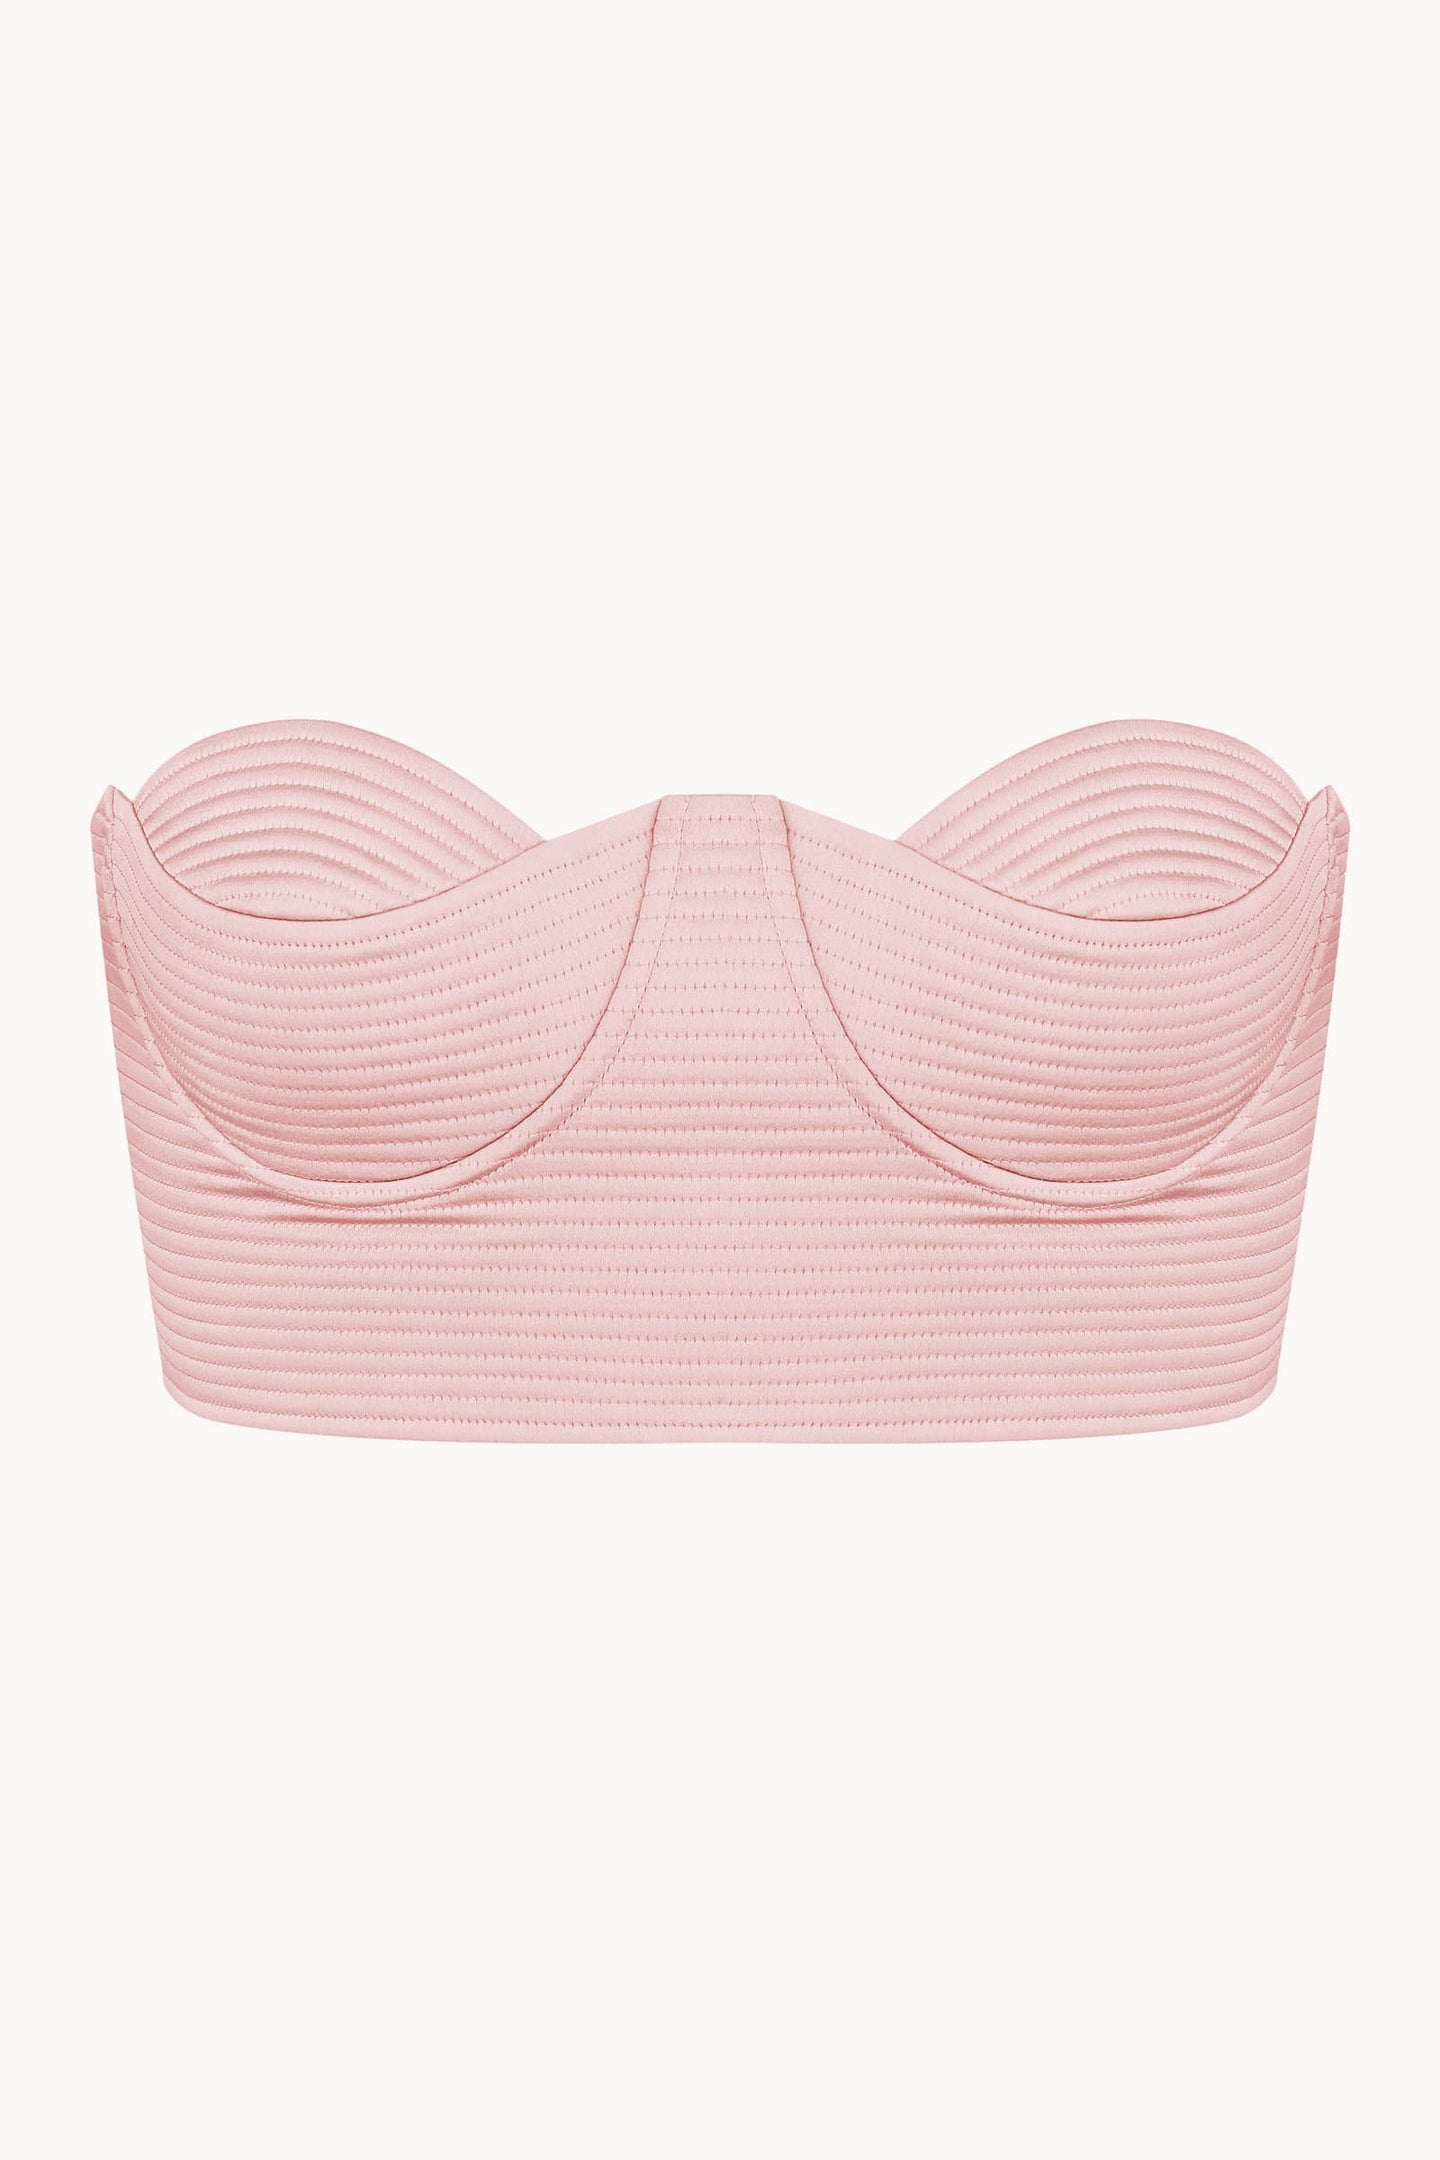 Liv pink top front view